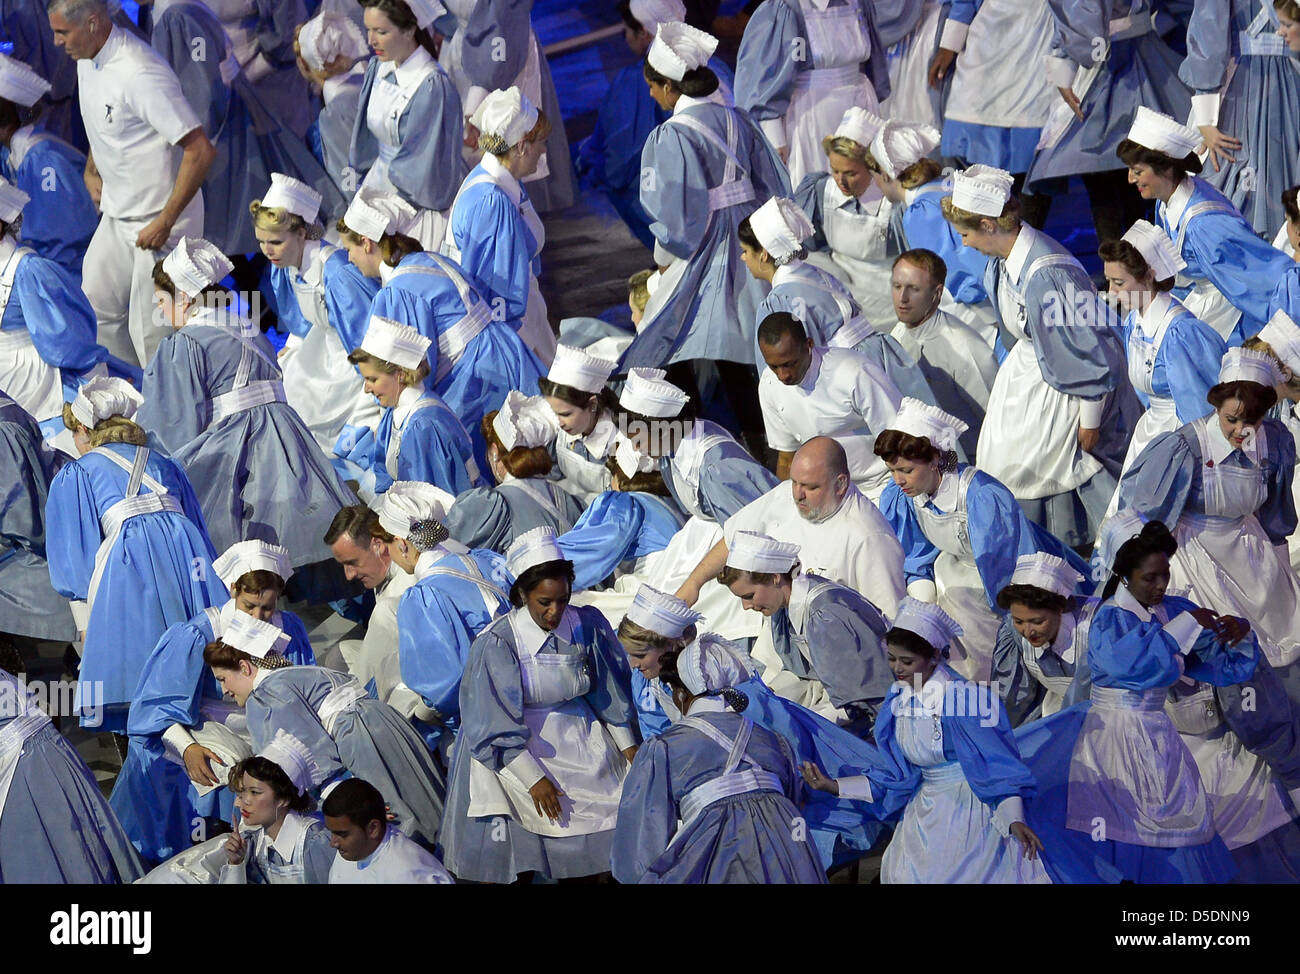 Nurses from the NHS - London 2012 olympics opening ceremony Stock Photo